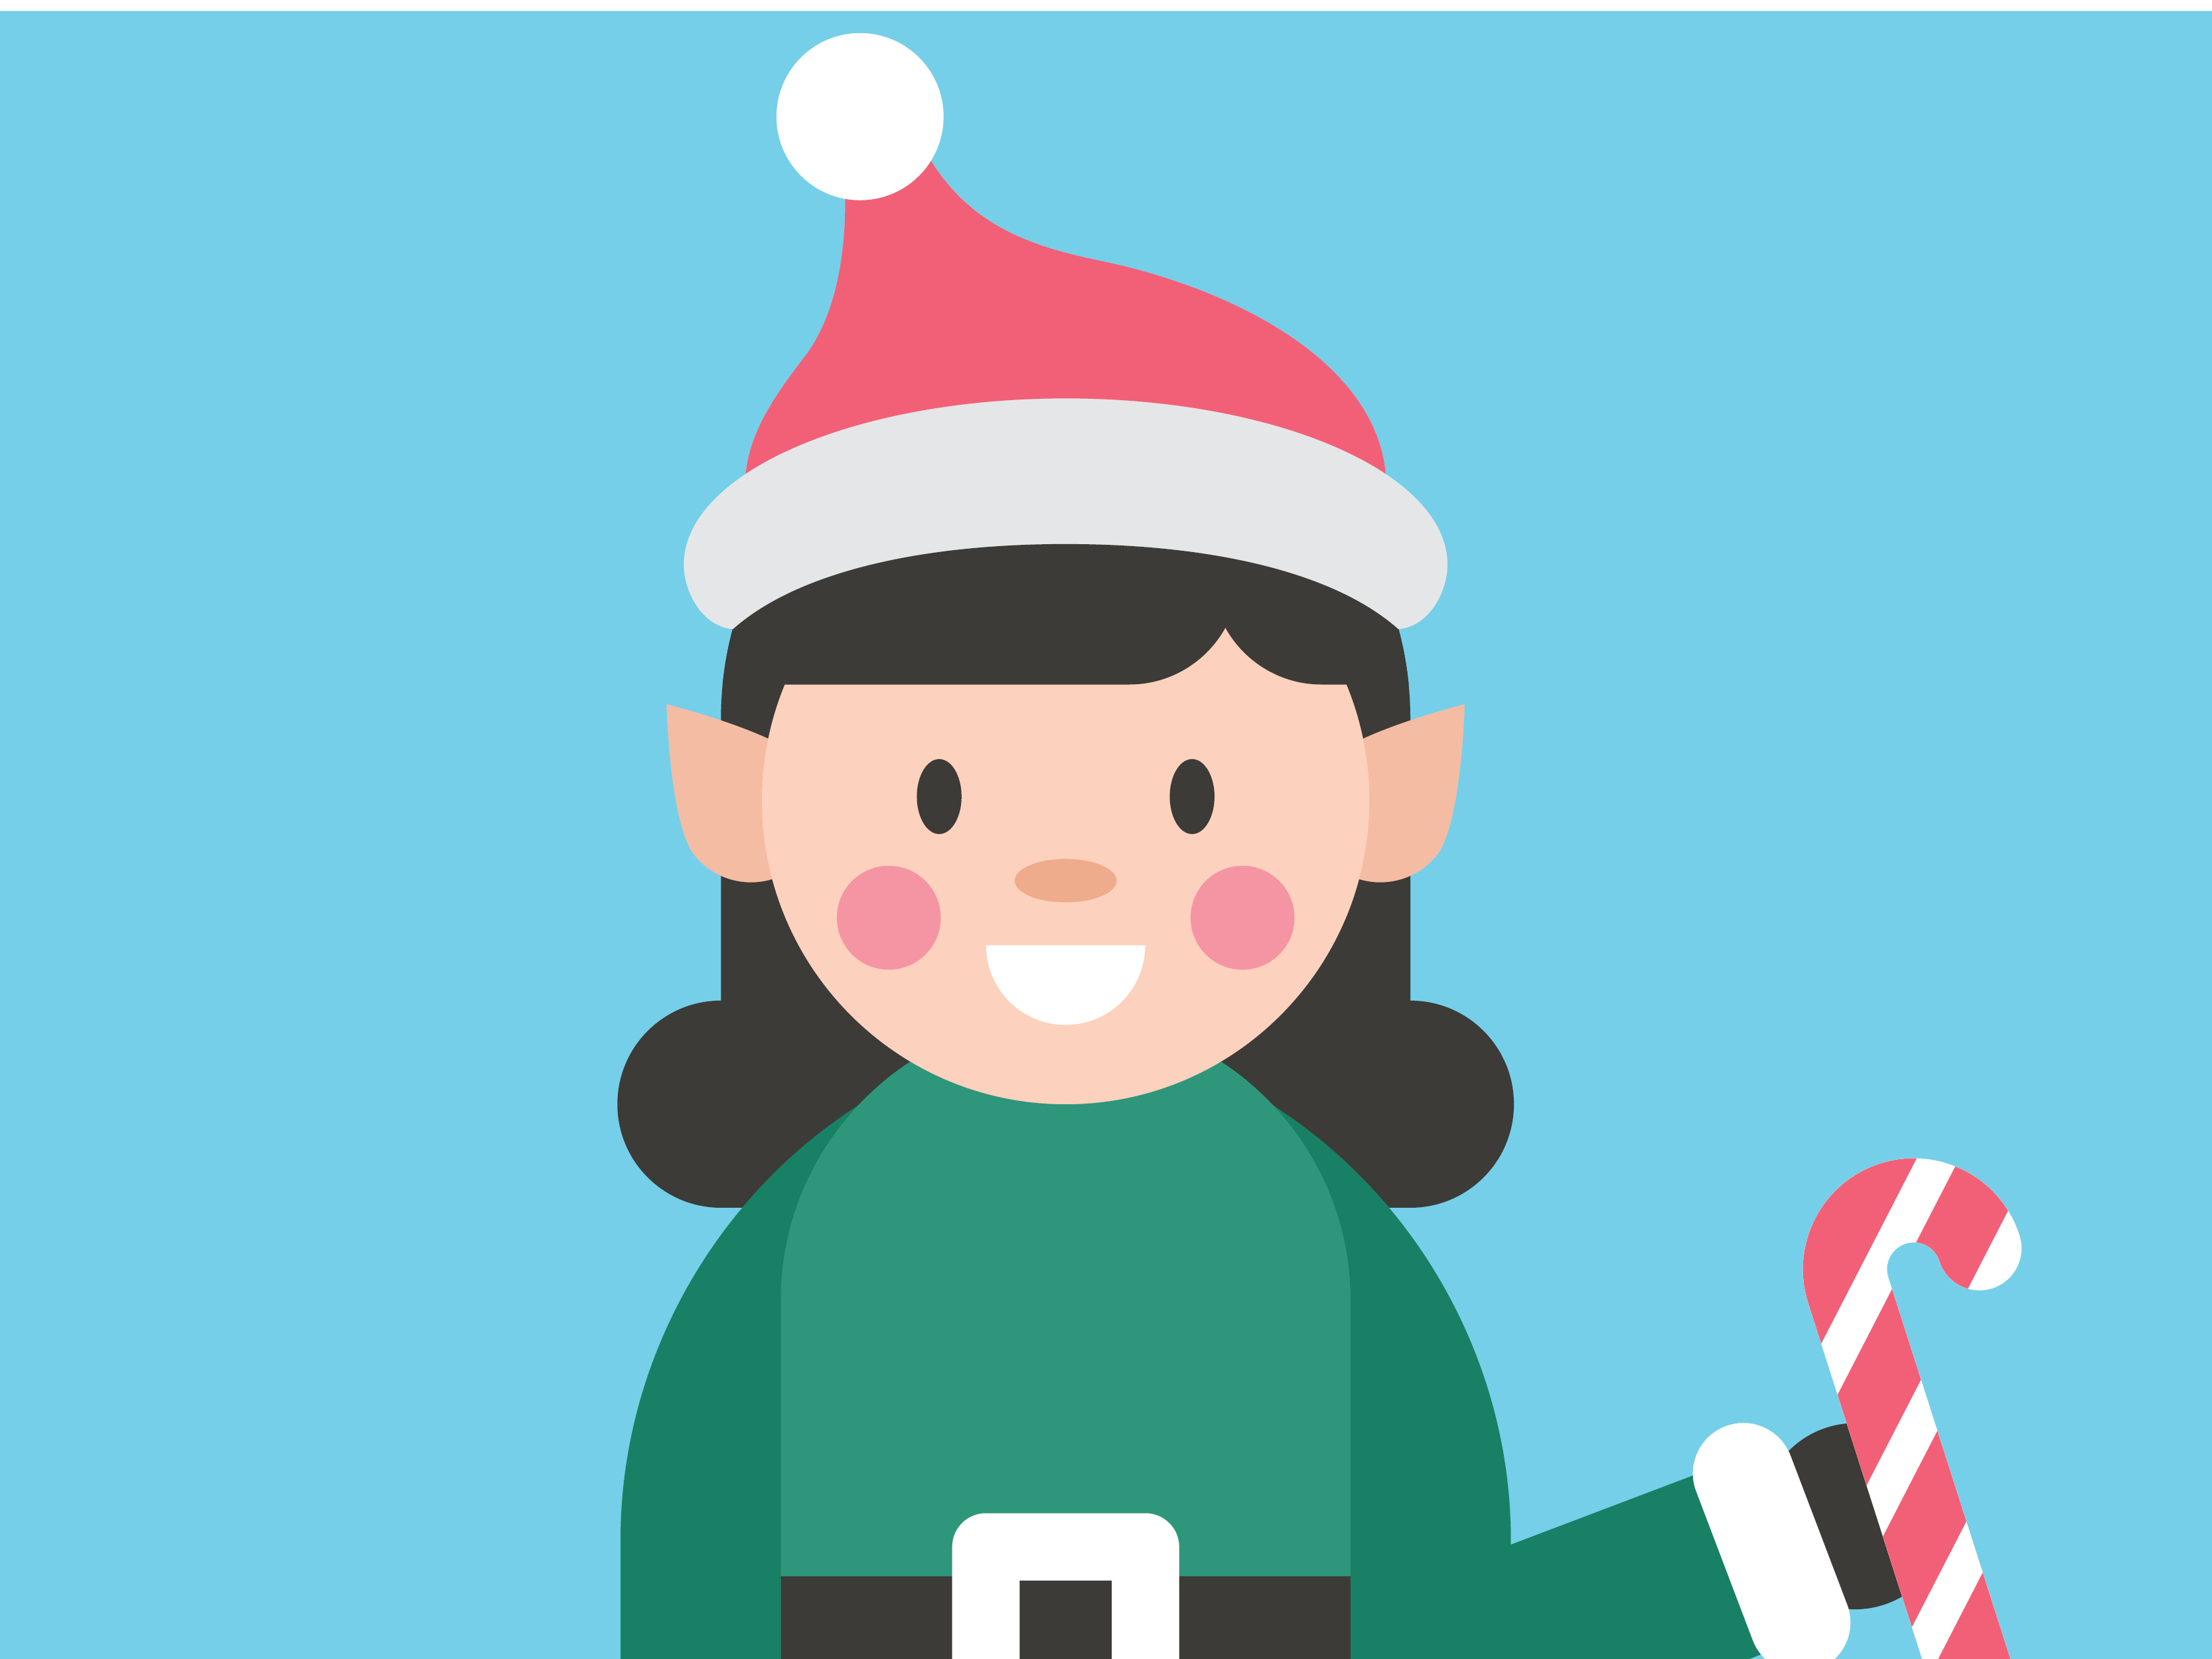 Illustration of a smiling elf with a candy cane